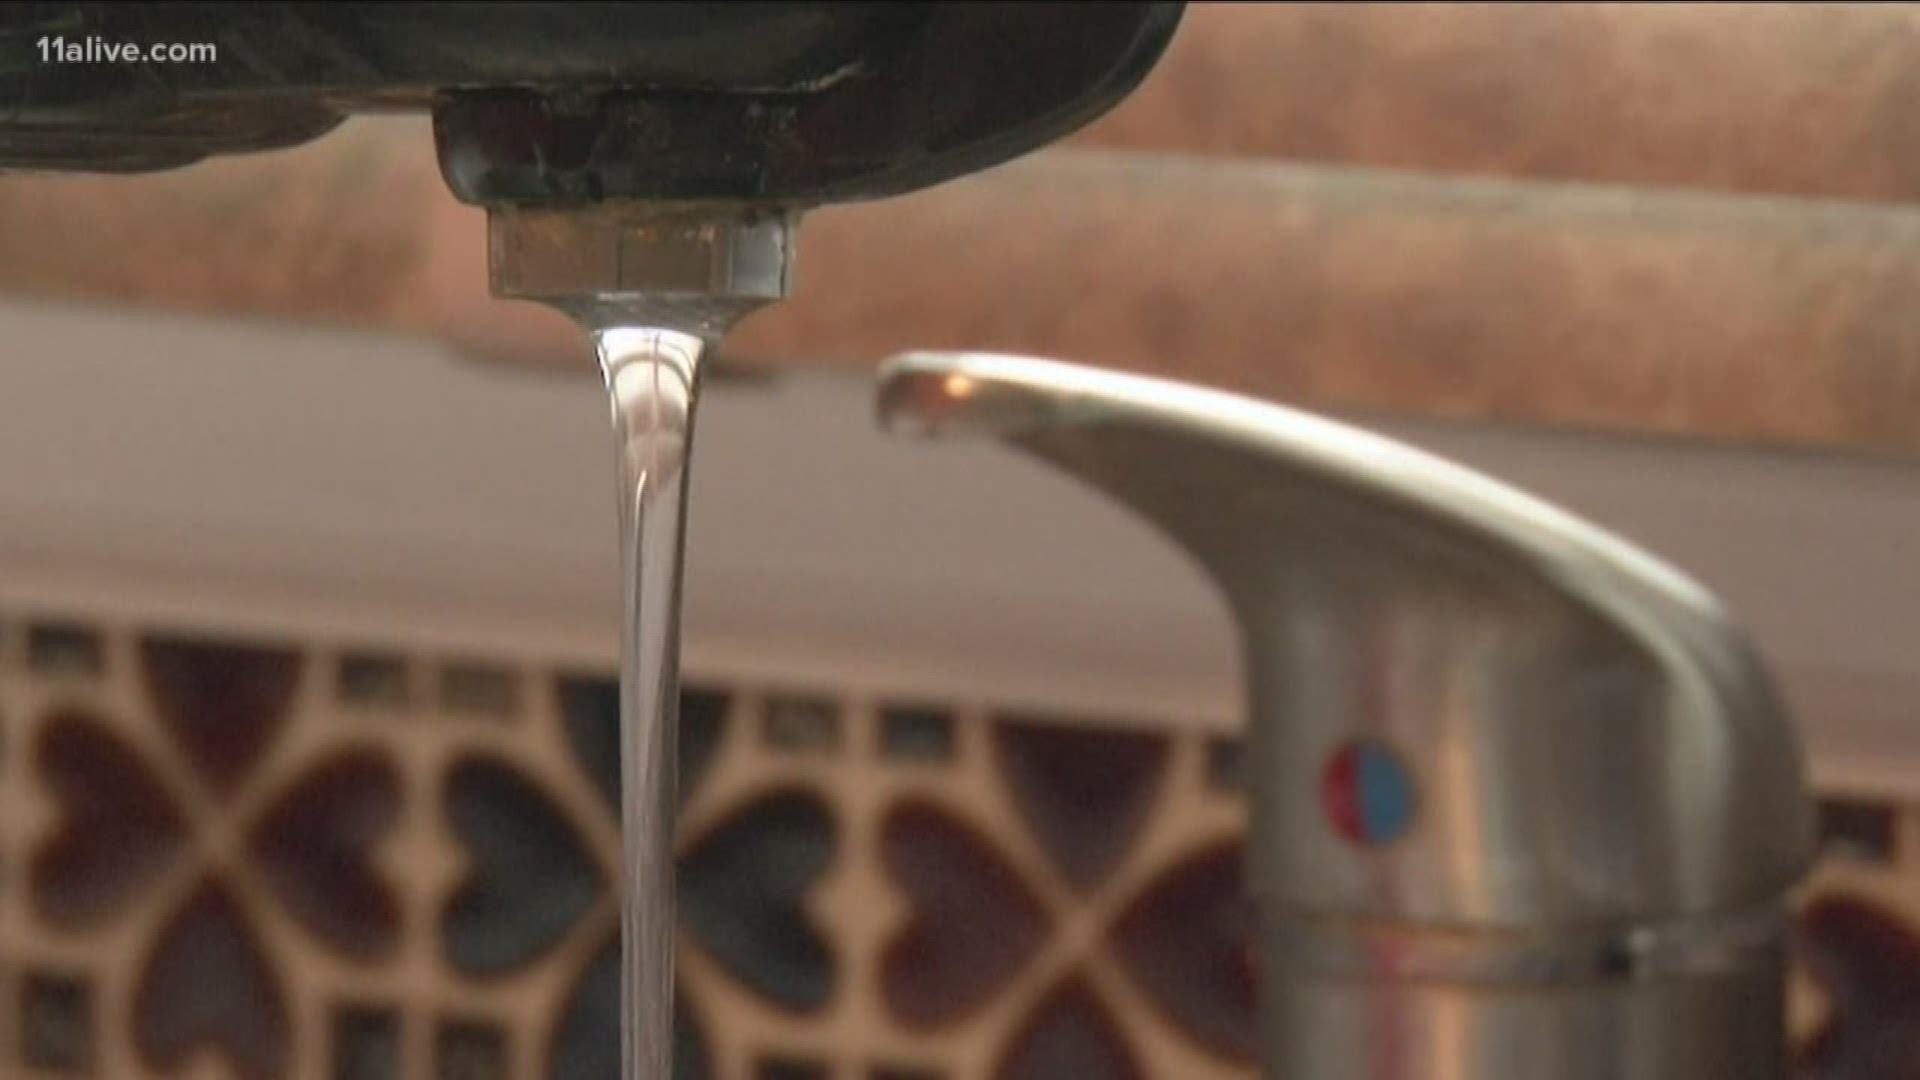 The system experienced a drop in water pressure after a loss of power, Monday night.